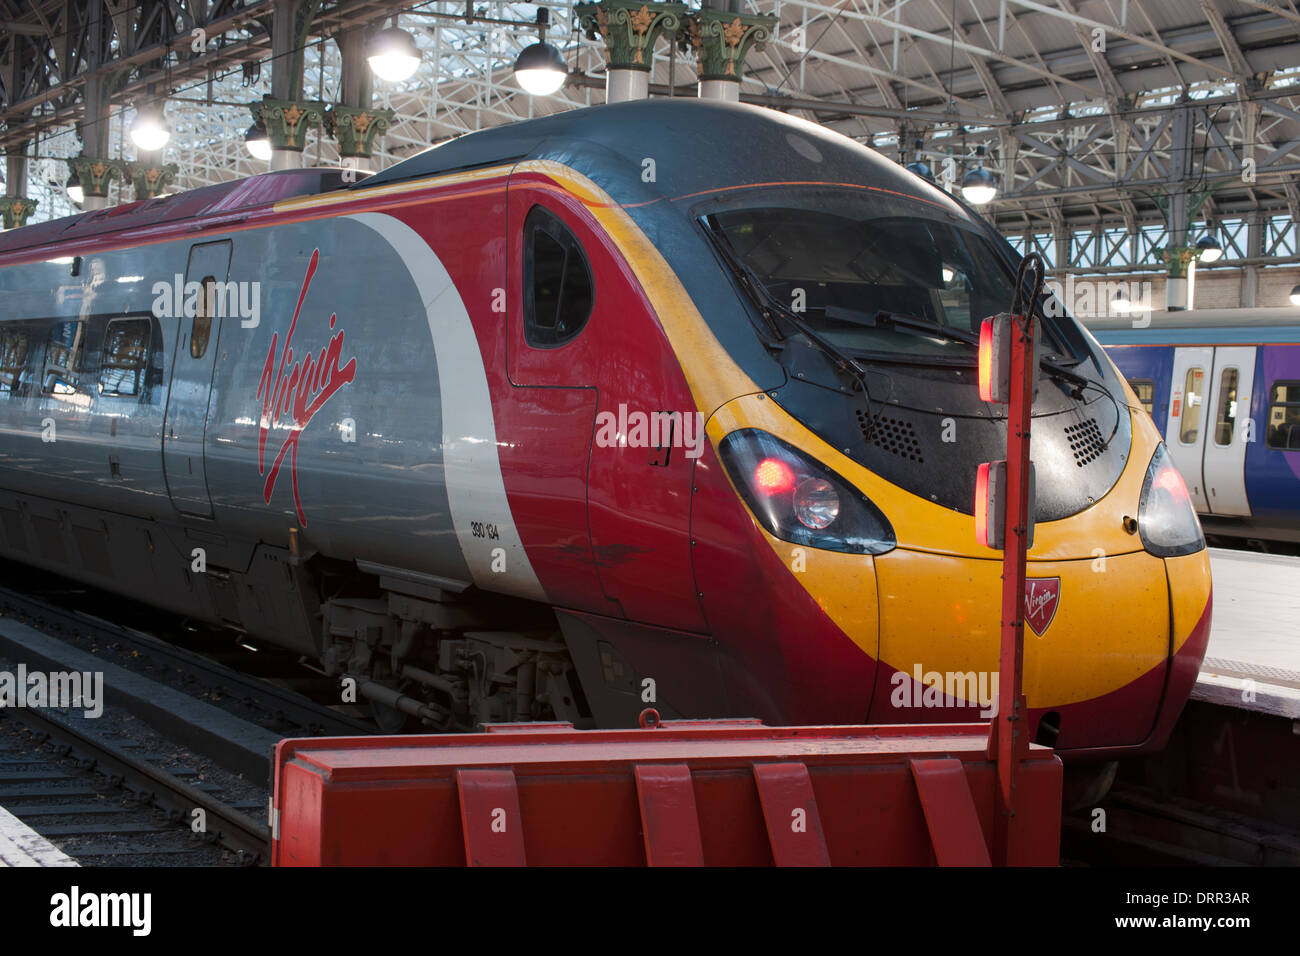 Class 390 Pendolino Virgin Train at Manchester Piccadilly Railway Station, Manchester, England, UK Stock Photo